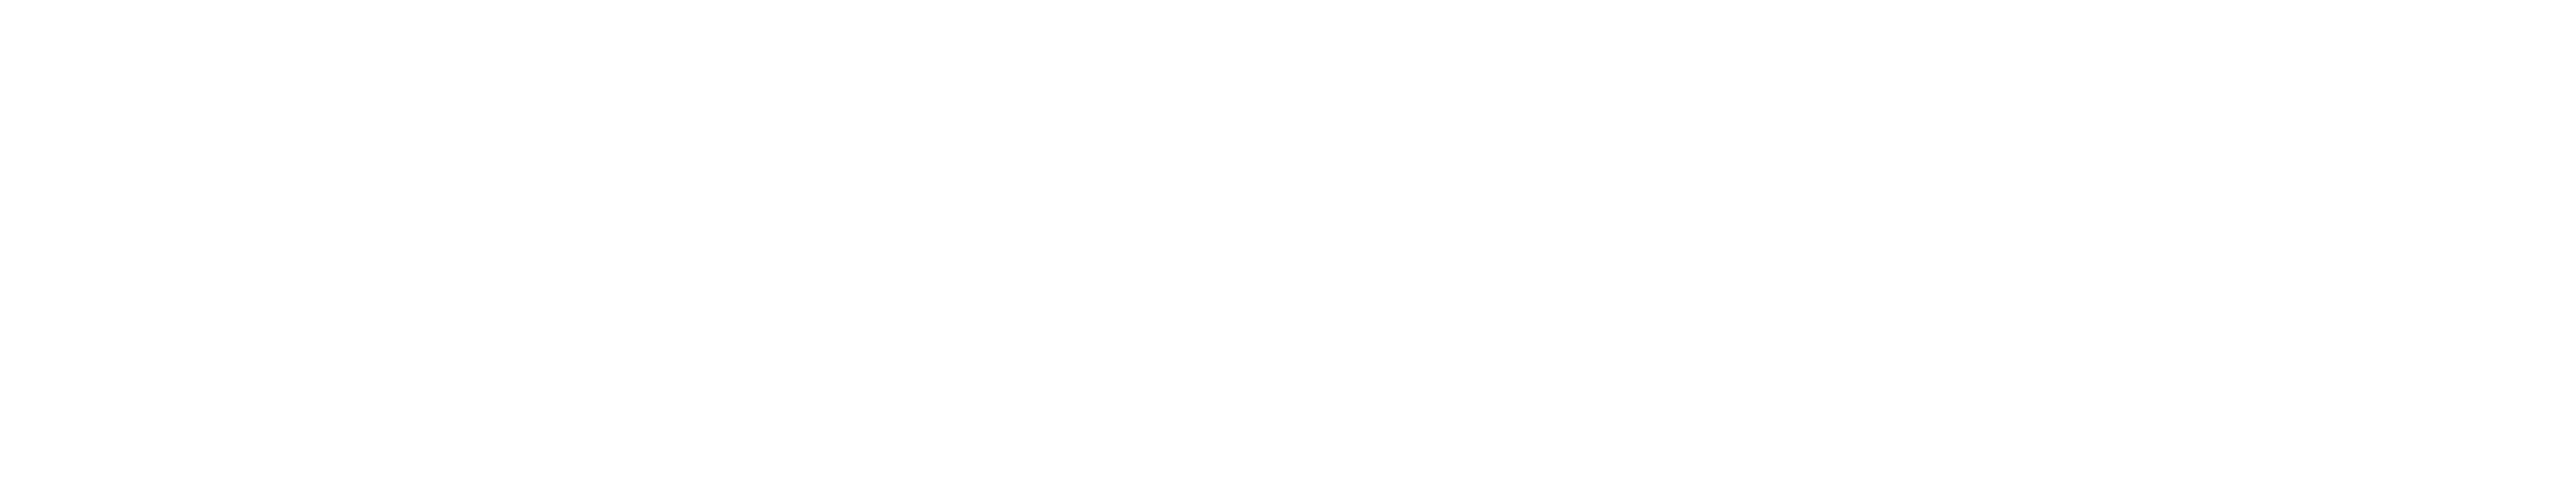 A long version of Brayden Rose for Lubbock City Council District 4's logo in all white